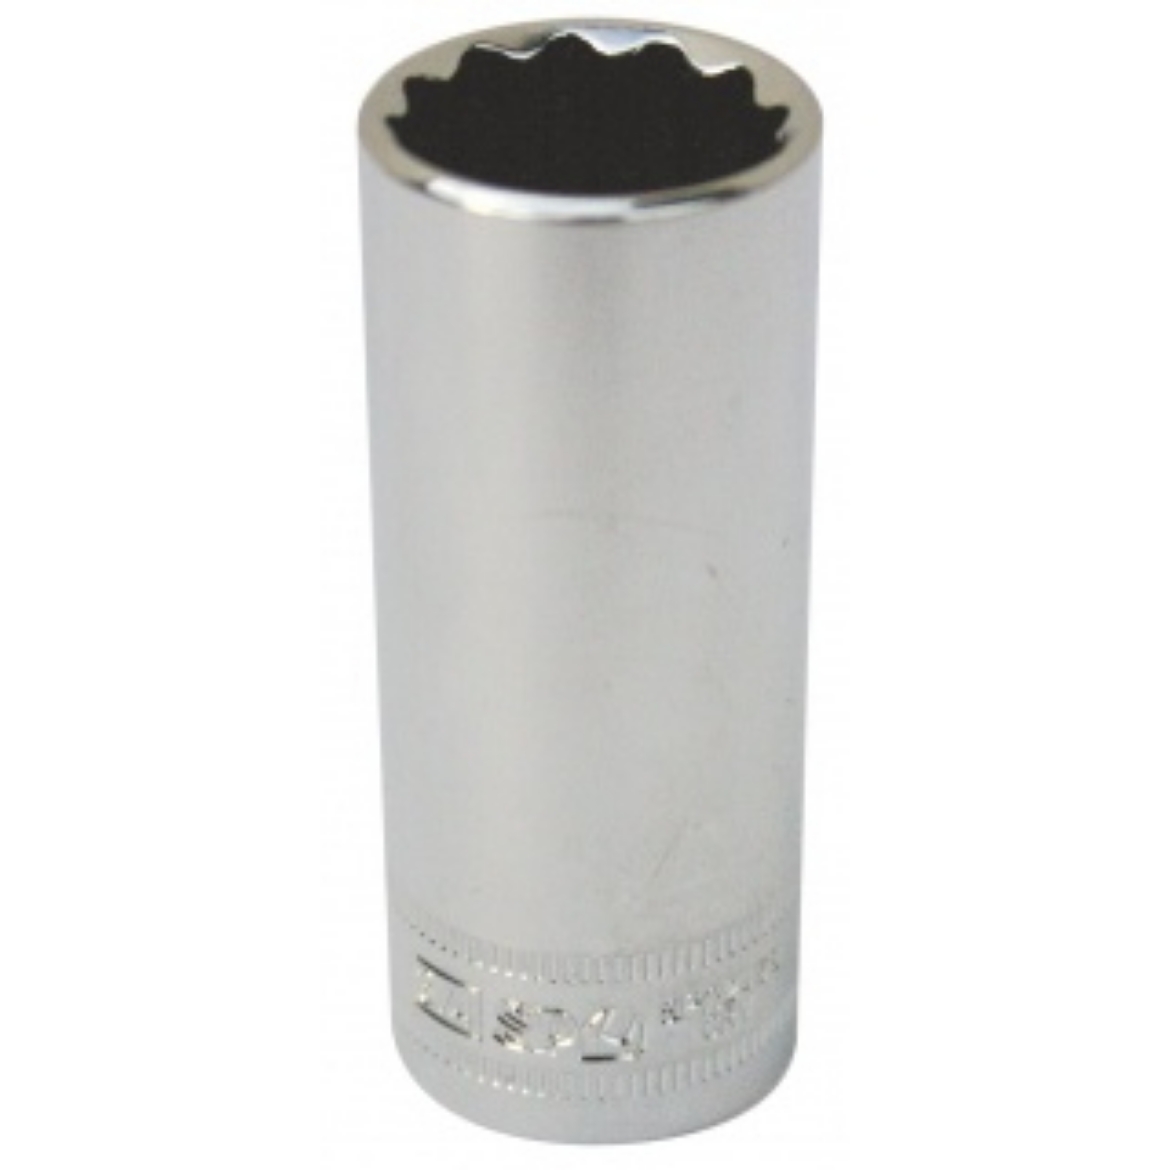 Picture of SOCKET DEEP 3/8"DR 12PT METRIC 11MM SP TOOLS